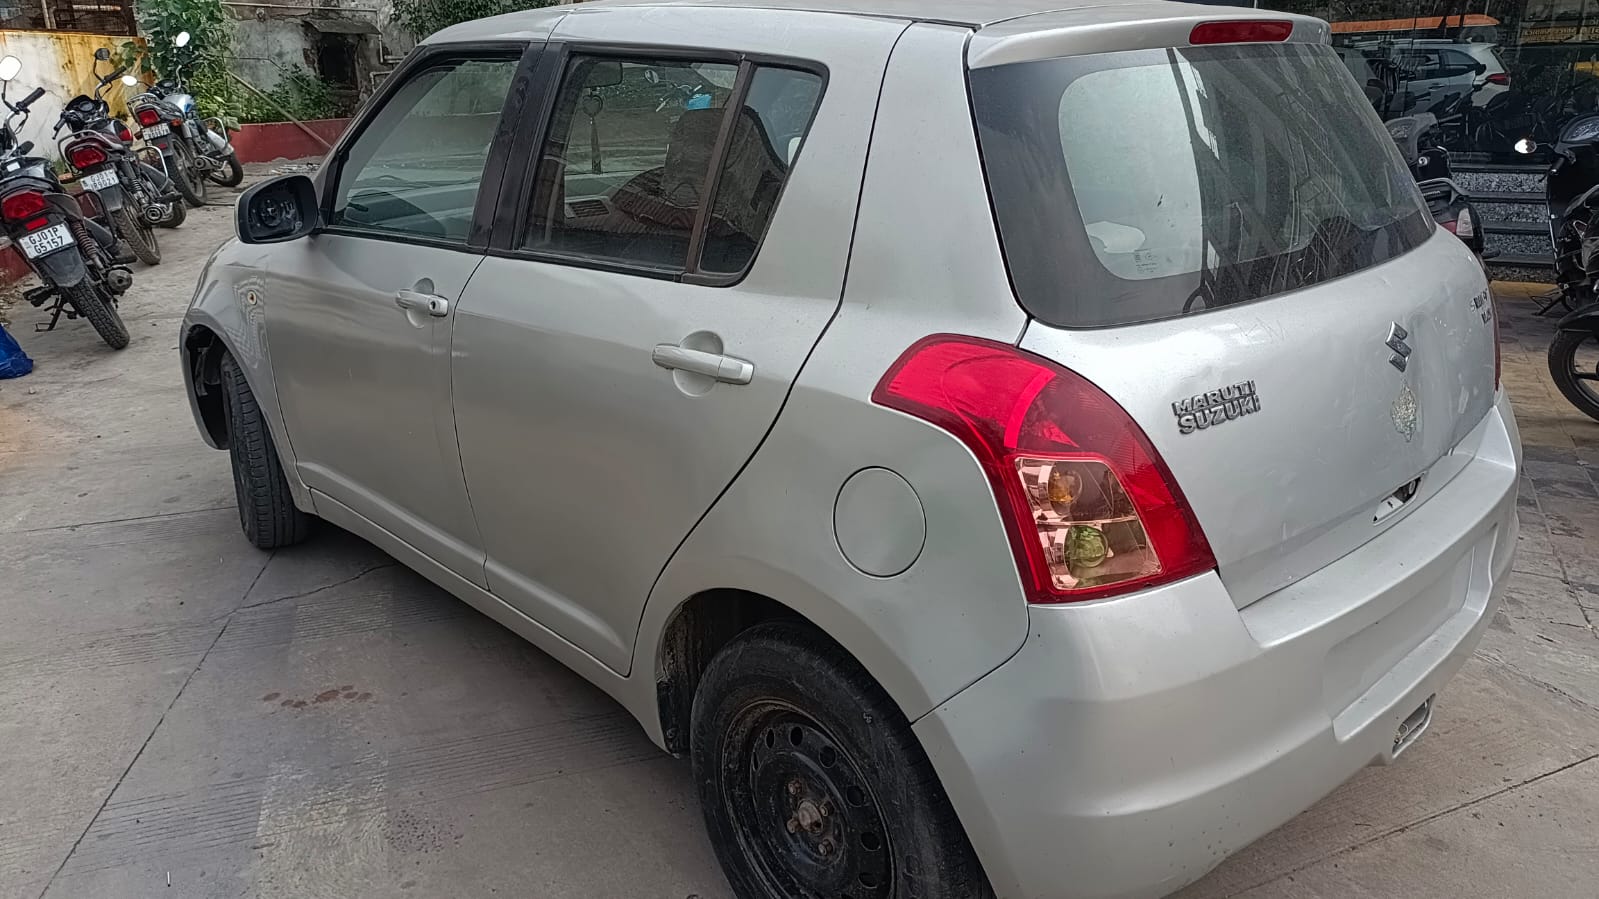 Details View - Maruti Suzuki swift photos - reseller,reseller marketplace,advetising your products,reseller bazzar,resellerbazzar.in,india's classified site,Maruti Suzuki swift , Old Maruti Suzuki swift , Used Maruti Suzuki swift in Ahmedabad , Maruti Suzuki swift in Ahmedabad